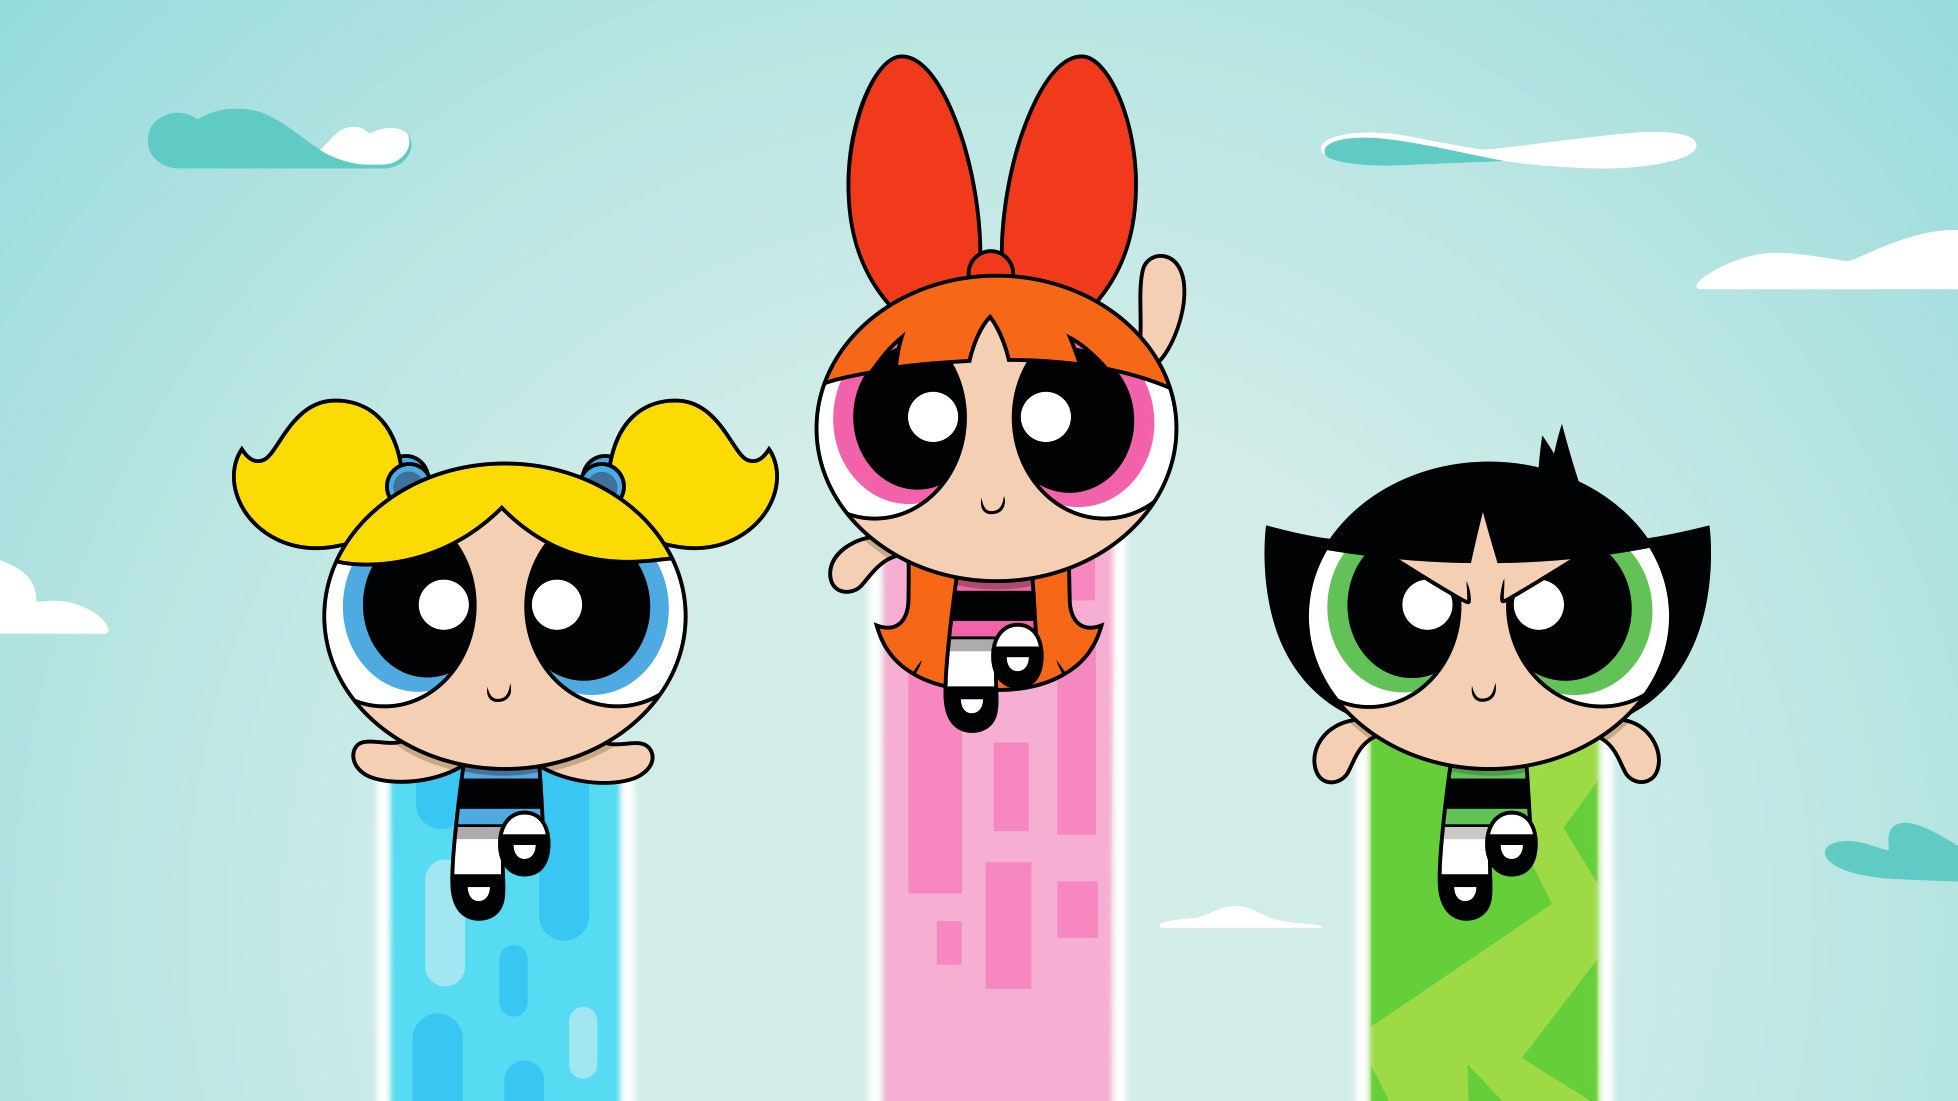 Powerpuff girls being forced 2 have sex